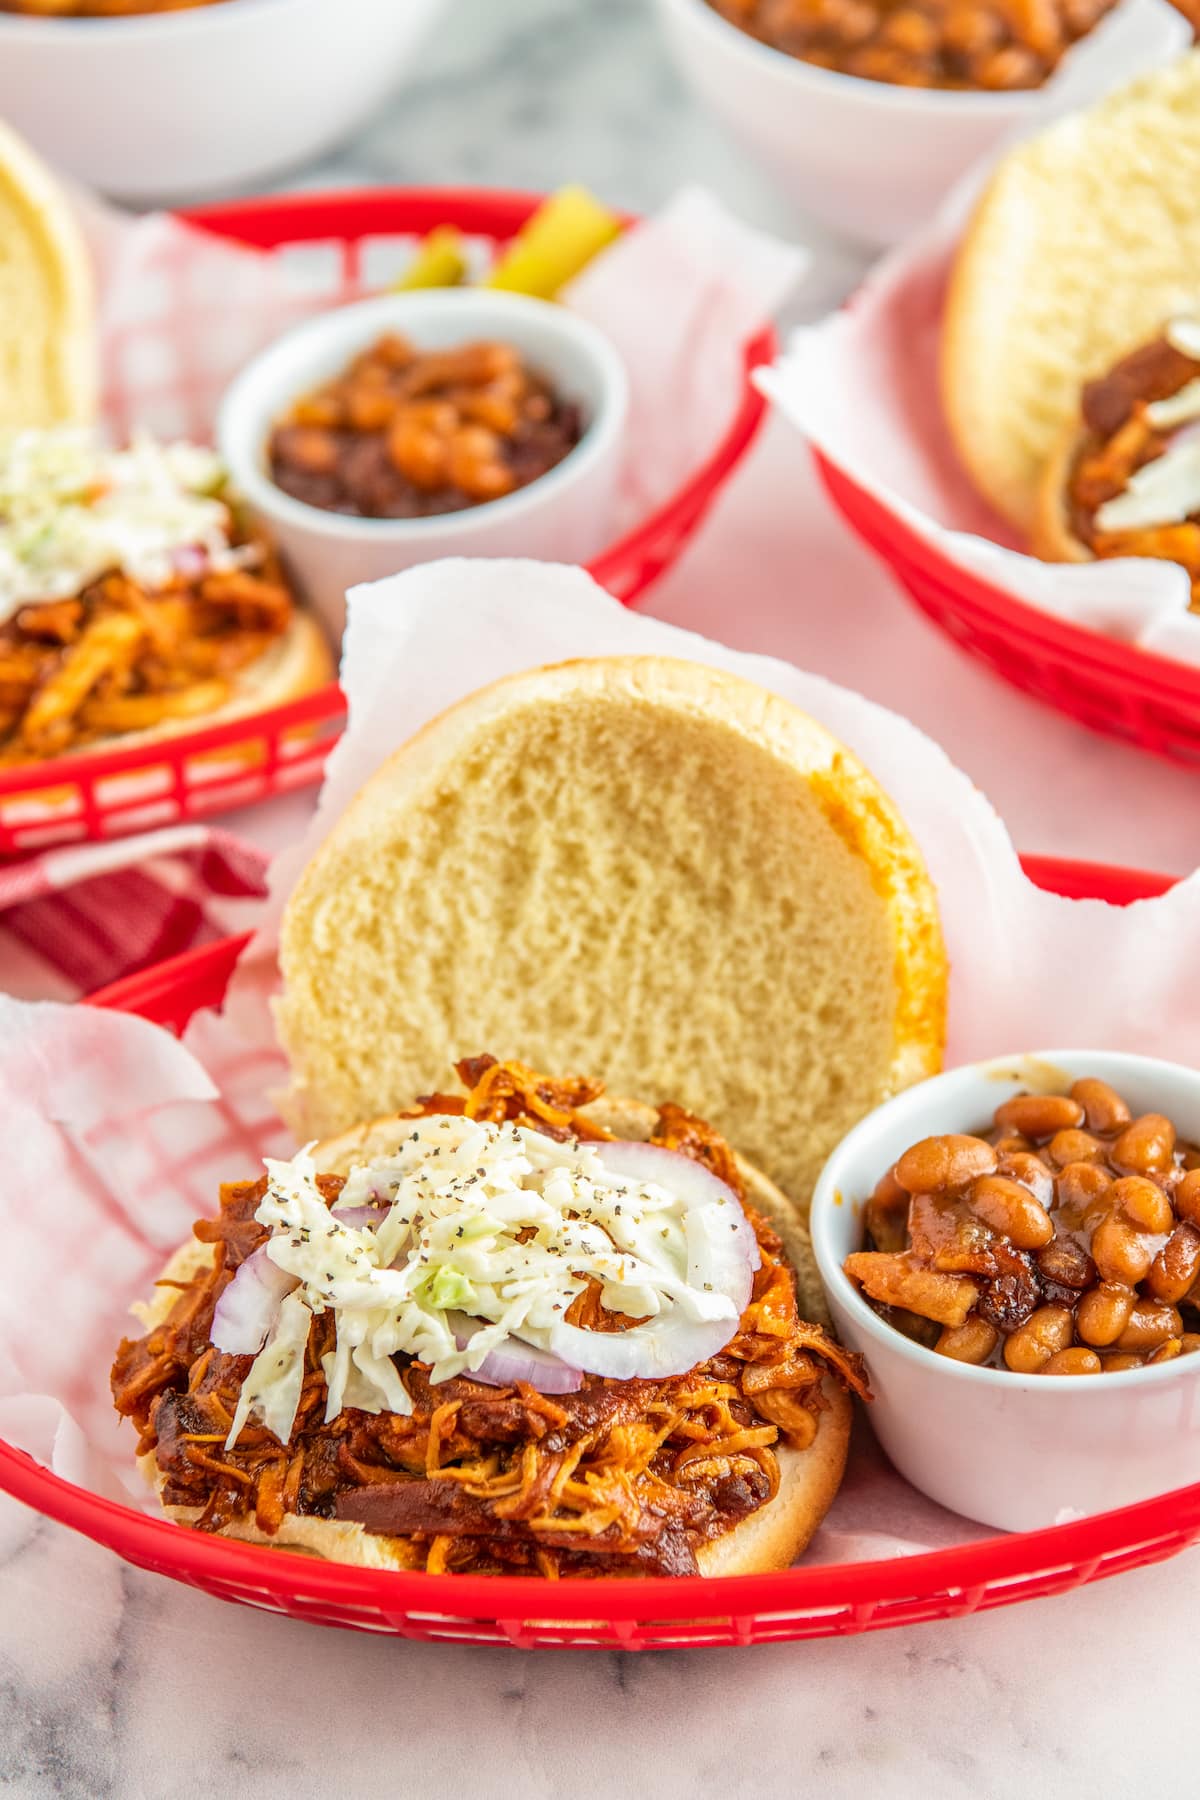 BBQ Chicken sandwiches with onions and slaw on top in baskets with baked beans.